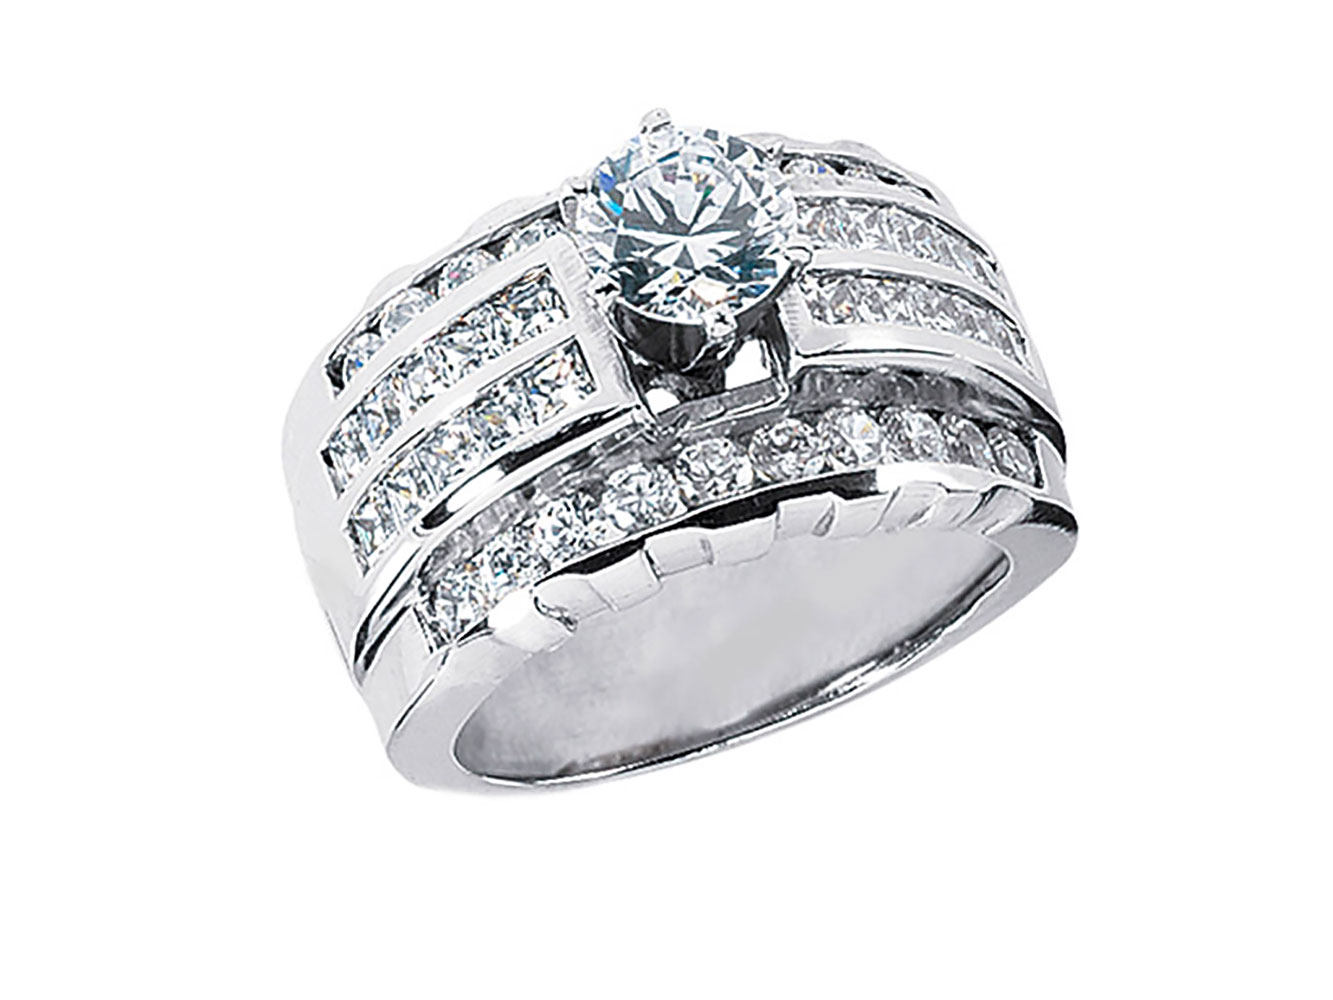 2.50 Ct Princess Baguette Round Cut Engagement Wedding Ring Solid 14K White Gold 